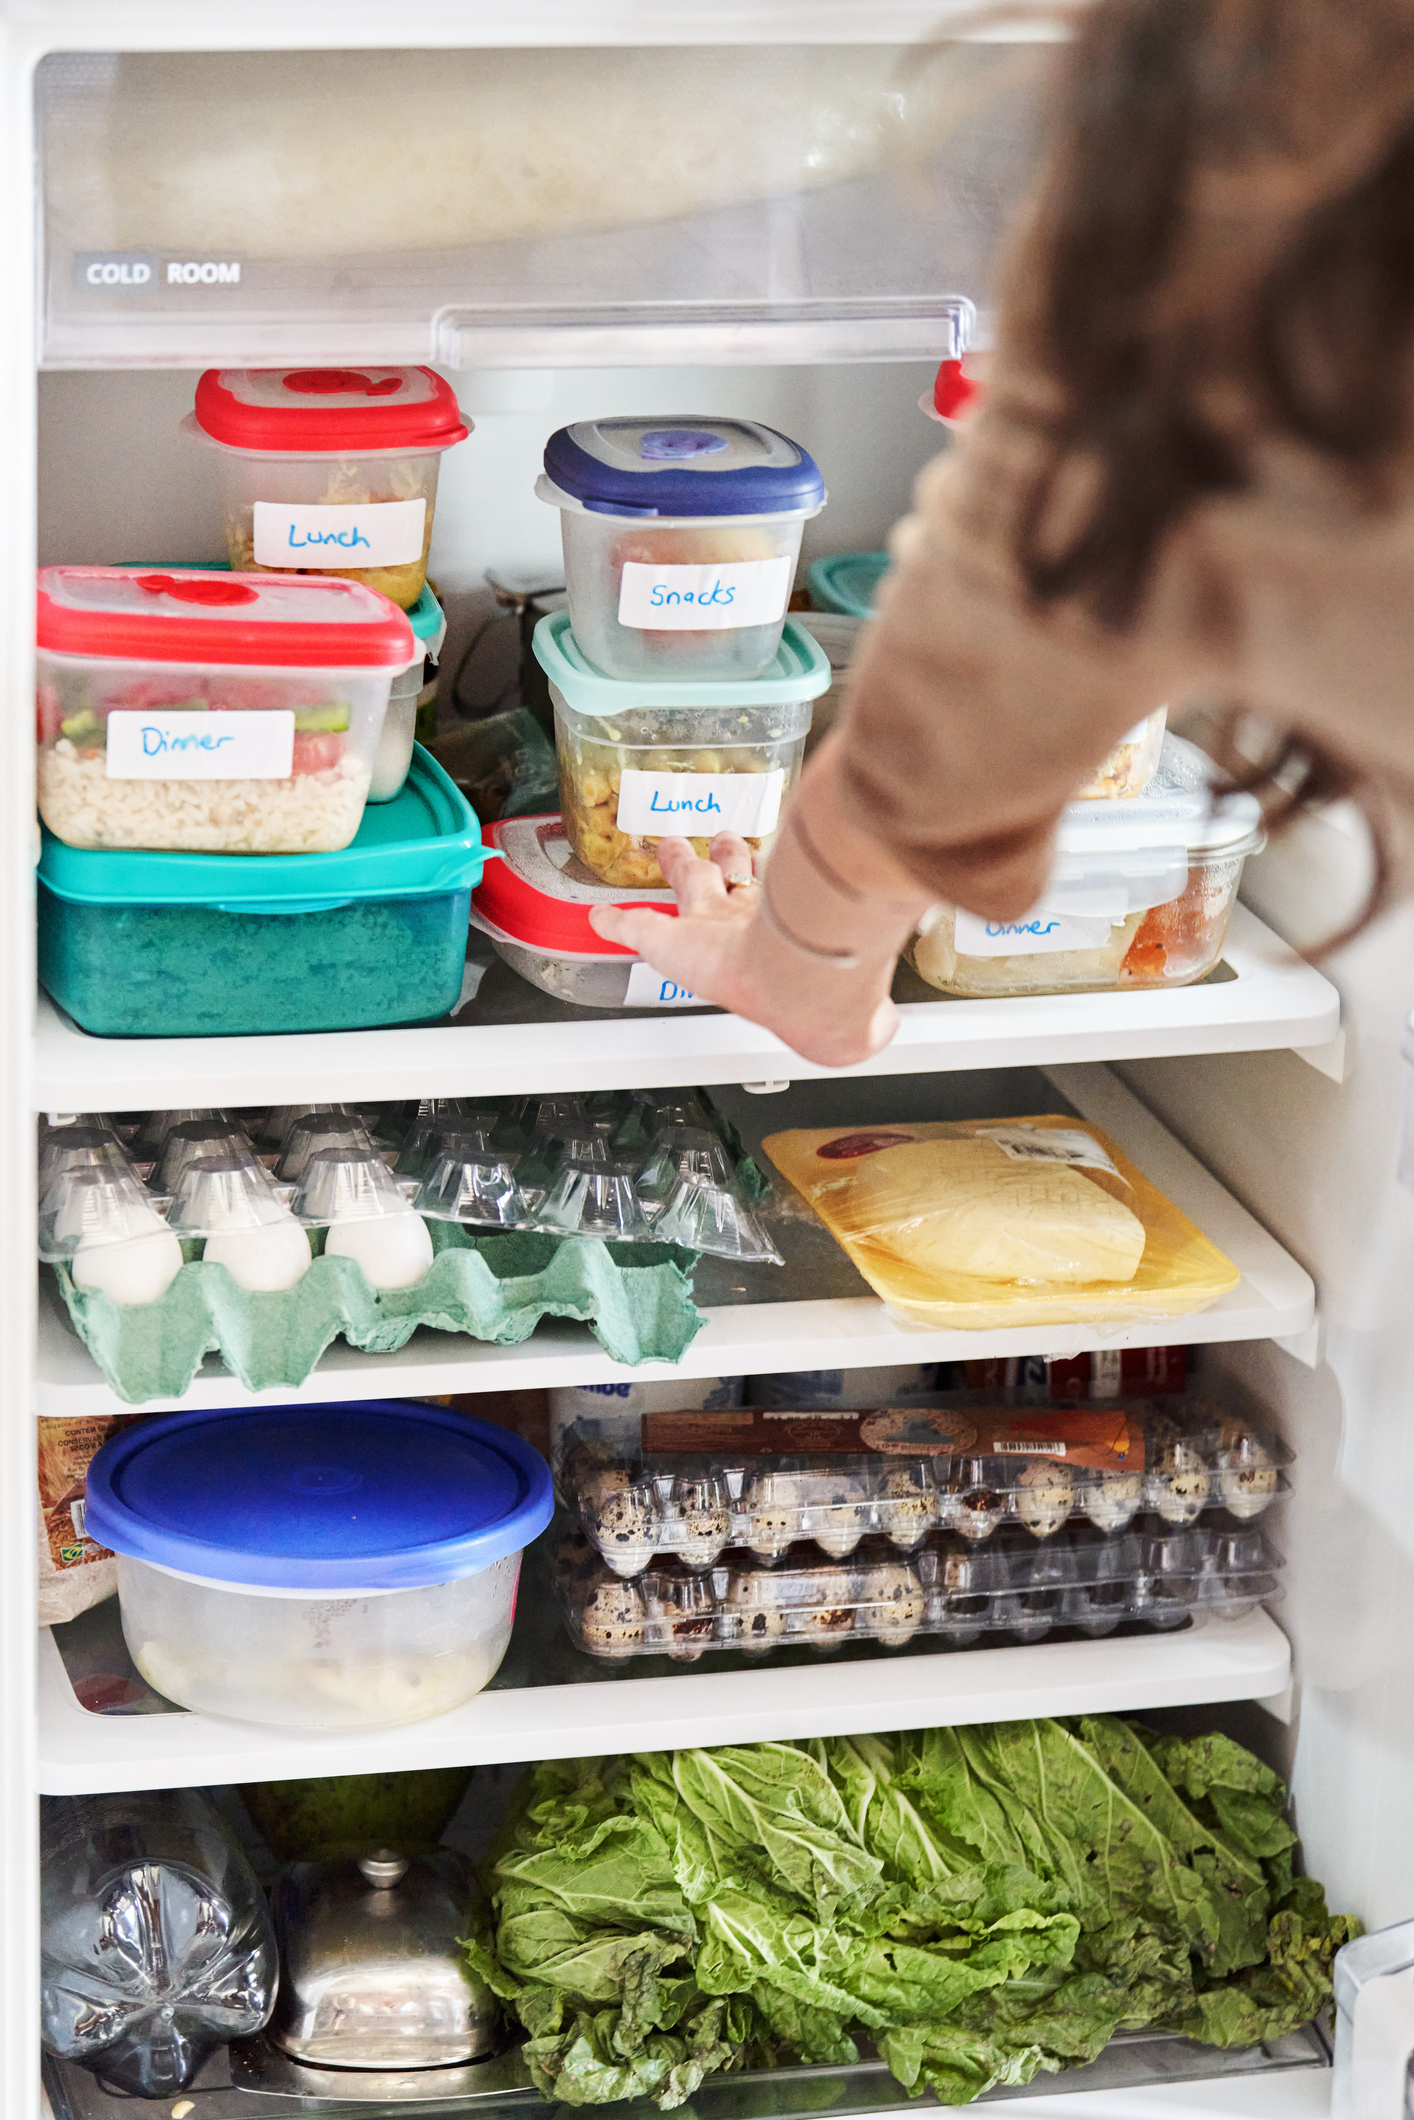 Person reaching into a fridge stocked with labeled containers and fresh produce